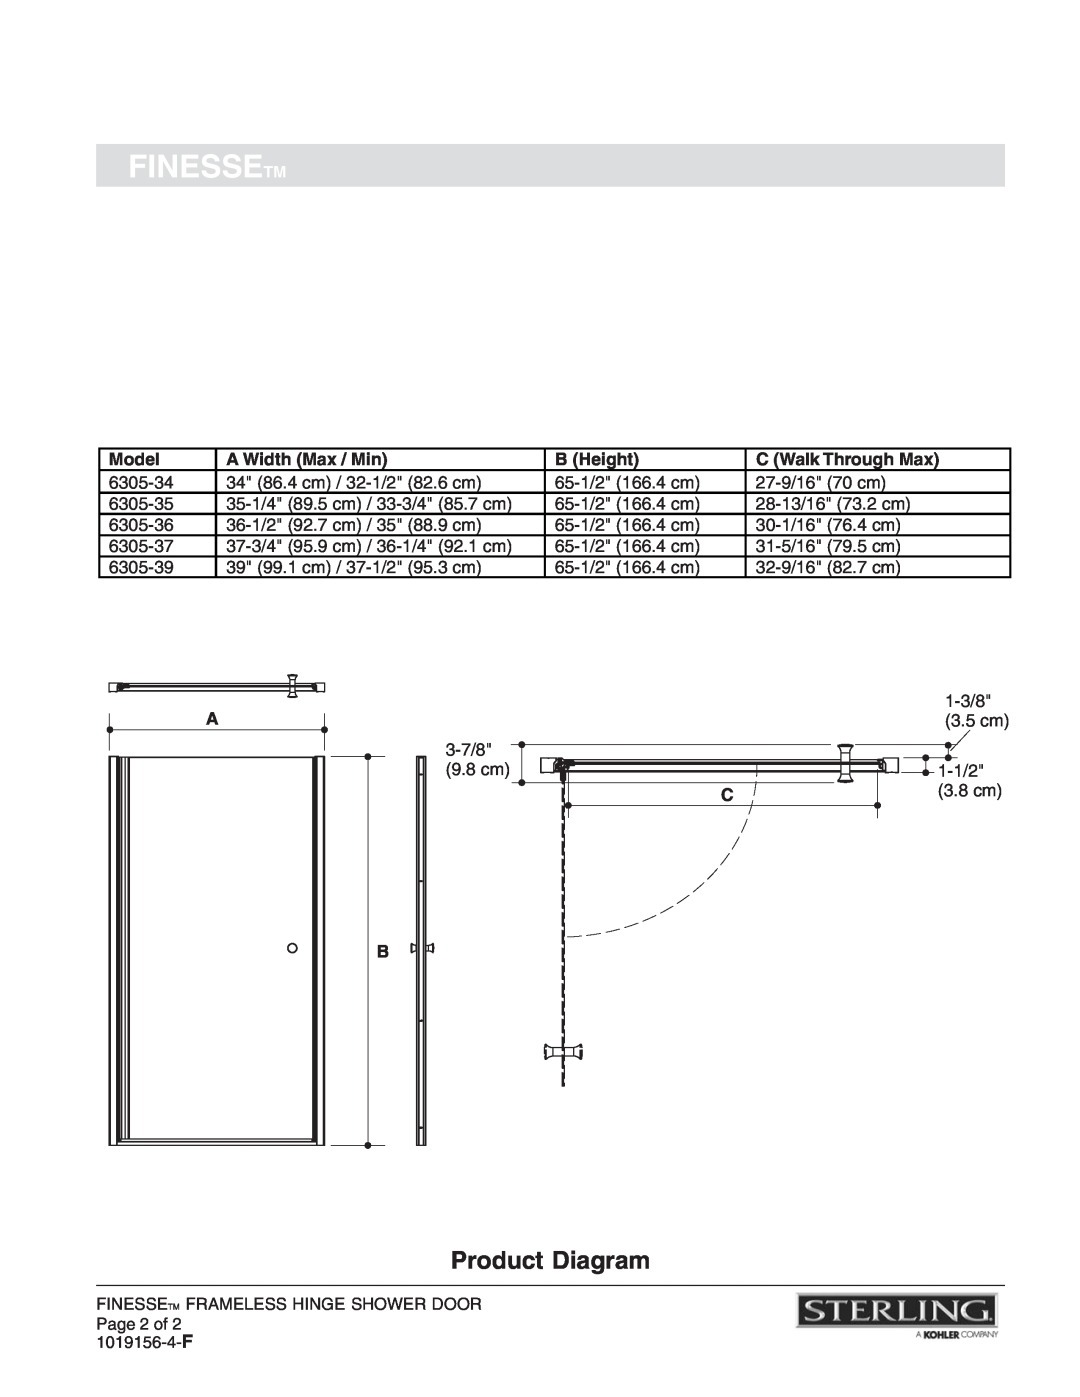 Sterling Plumbing 6305-30 Product Diagram, Finessetm, Model, A Width Max / Min, B Height, C Walk Through Max 